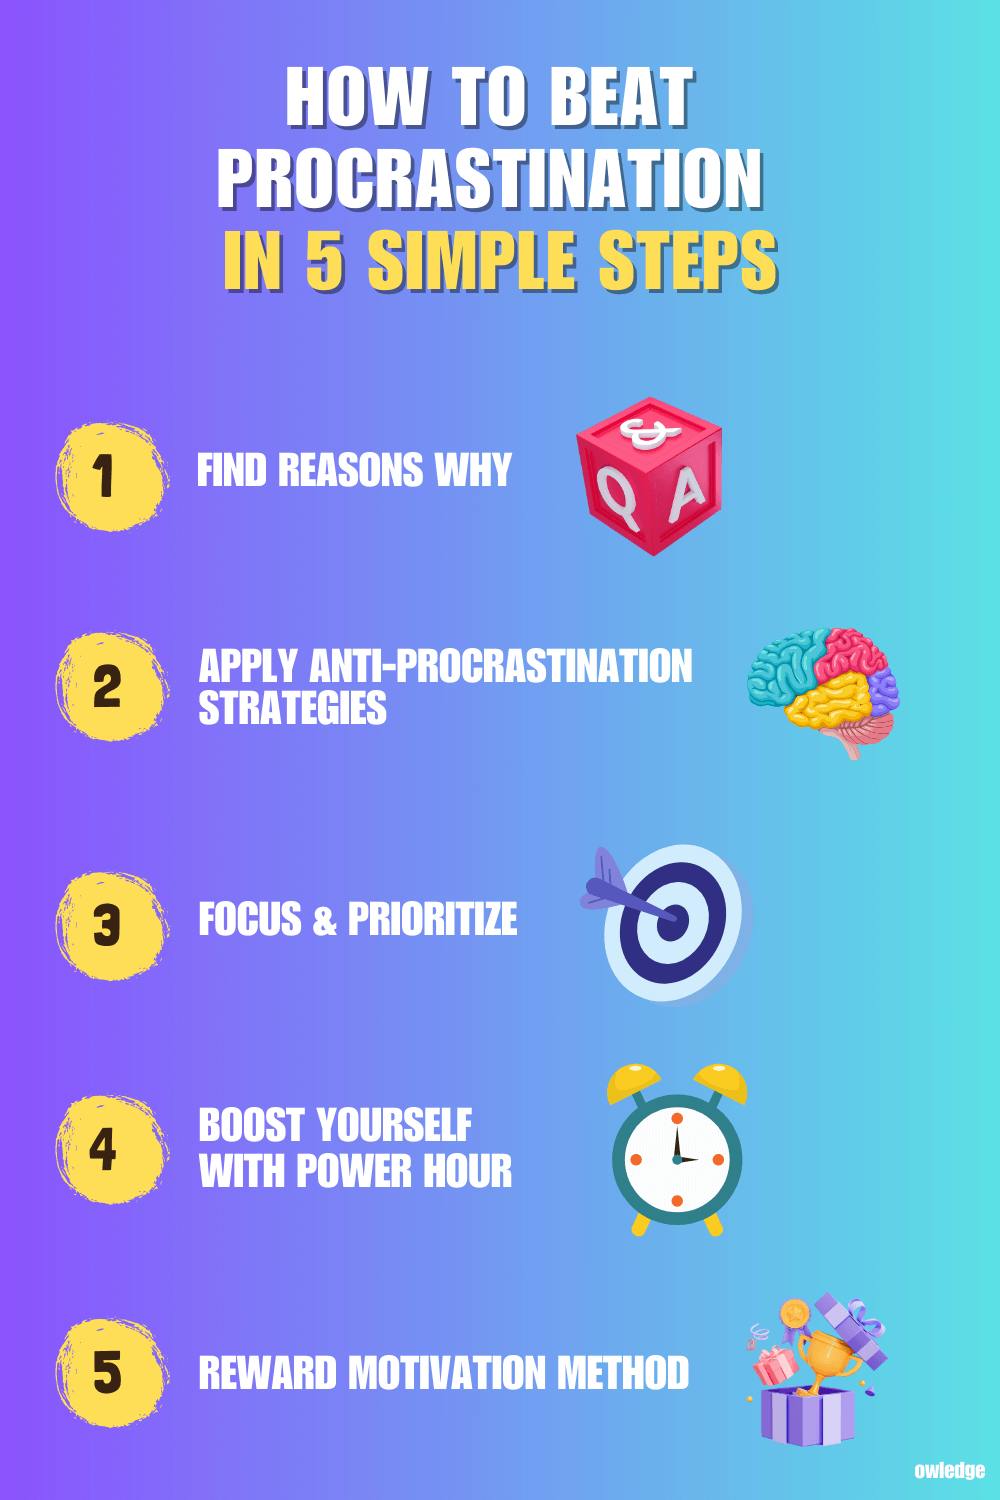 How to beat procrastination in 5 steps